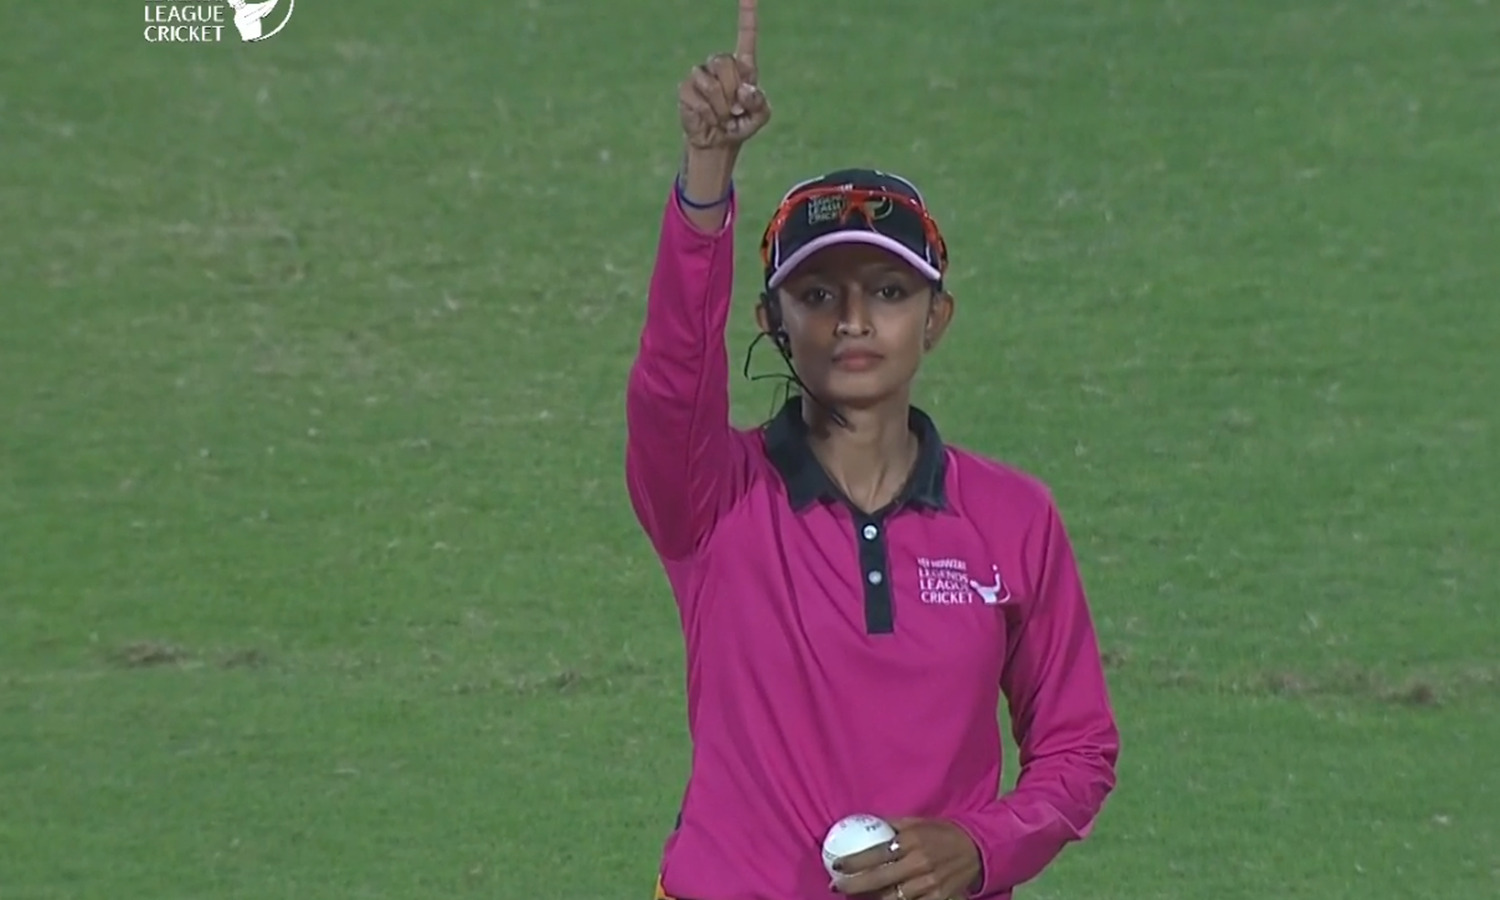 Who Is Shubhda Gaikwad The Indian Umpire Standing In Legend League Cricket Matches